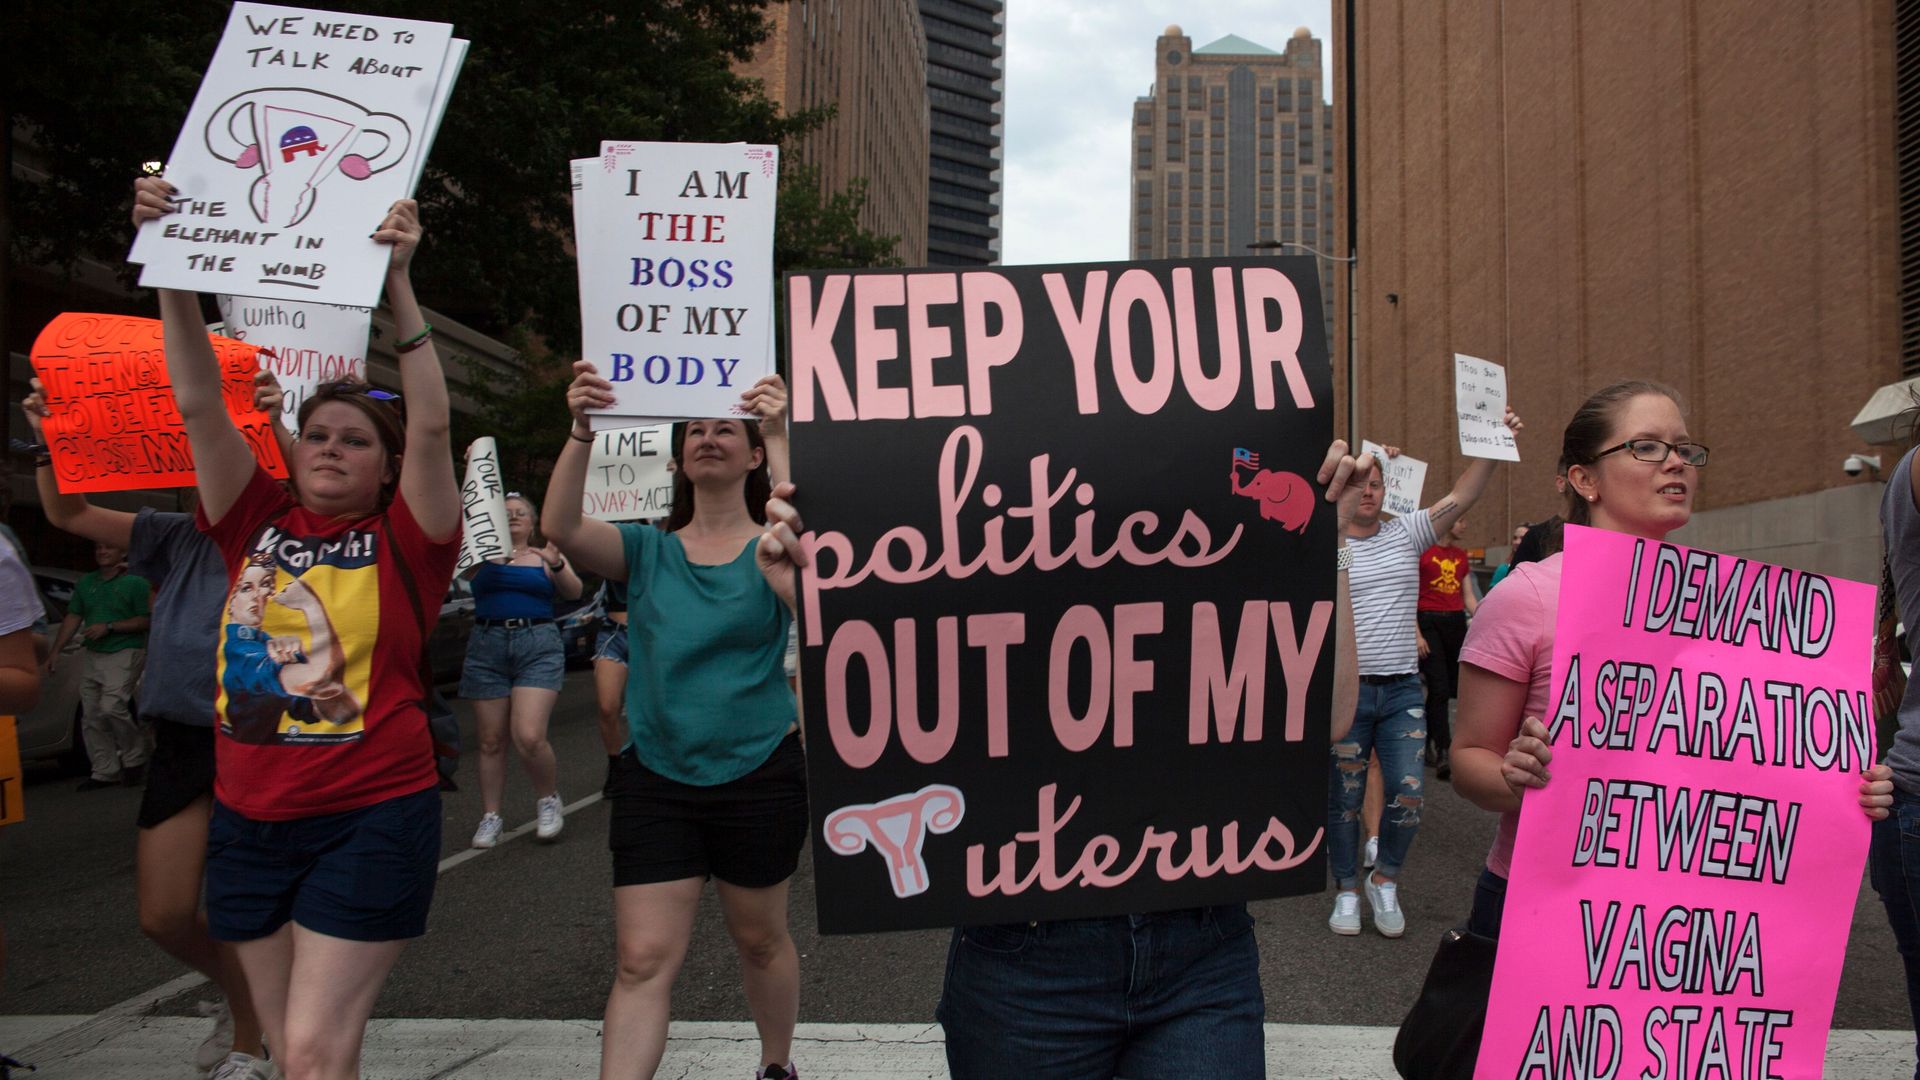 Protestors who support abortion rights with signs